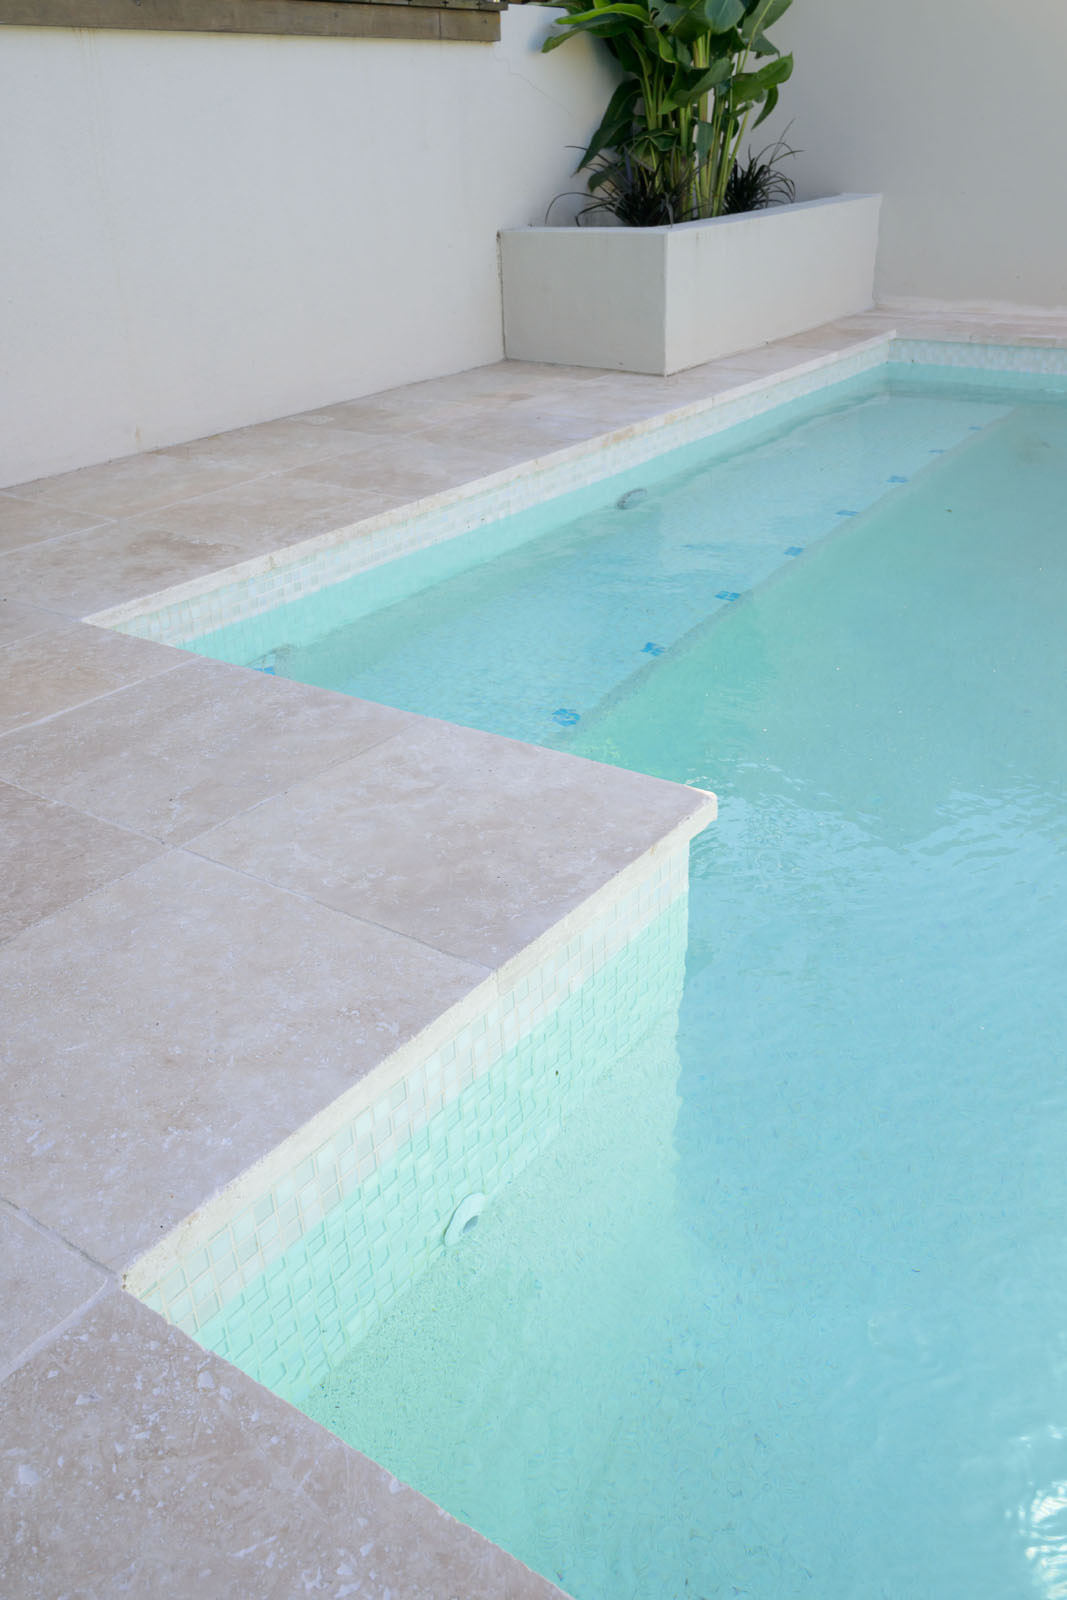 Linen Travertine pool coping and surrounds with White Crystal Pearl Blend GCR305 waterline tile